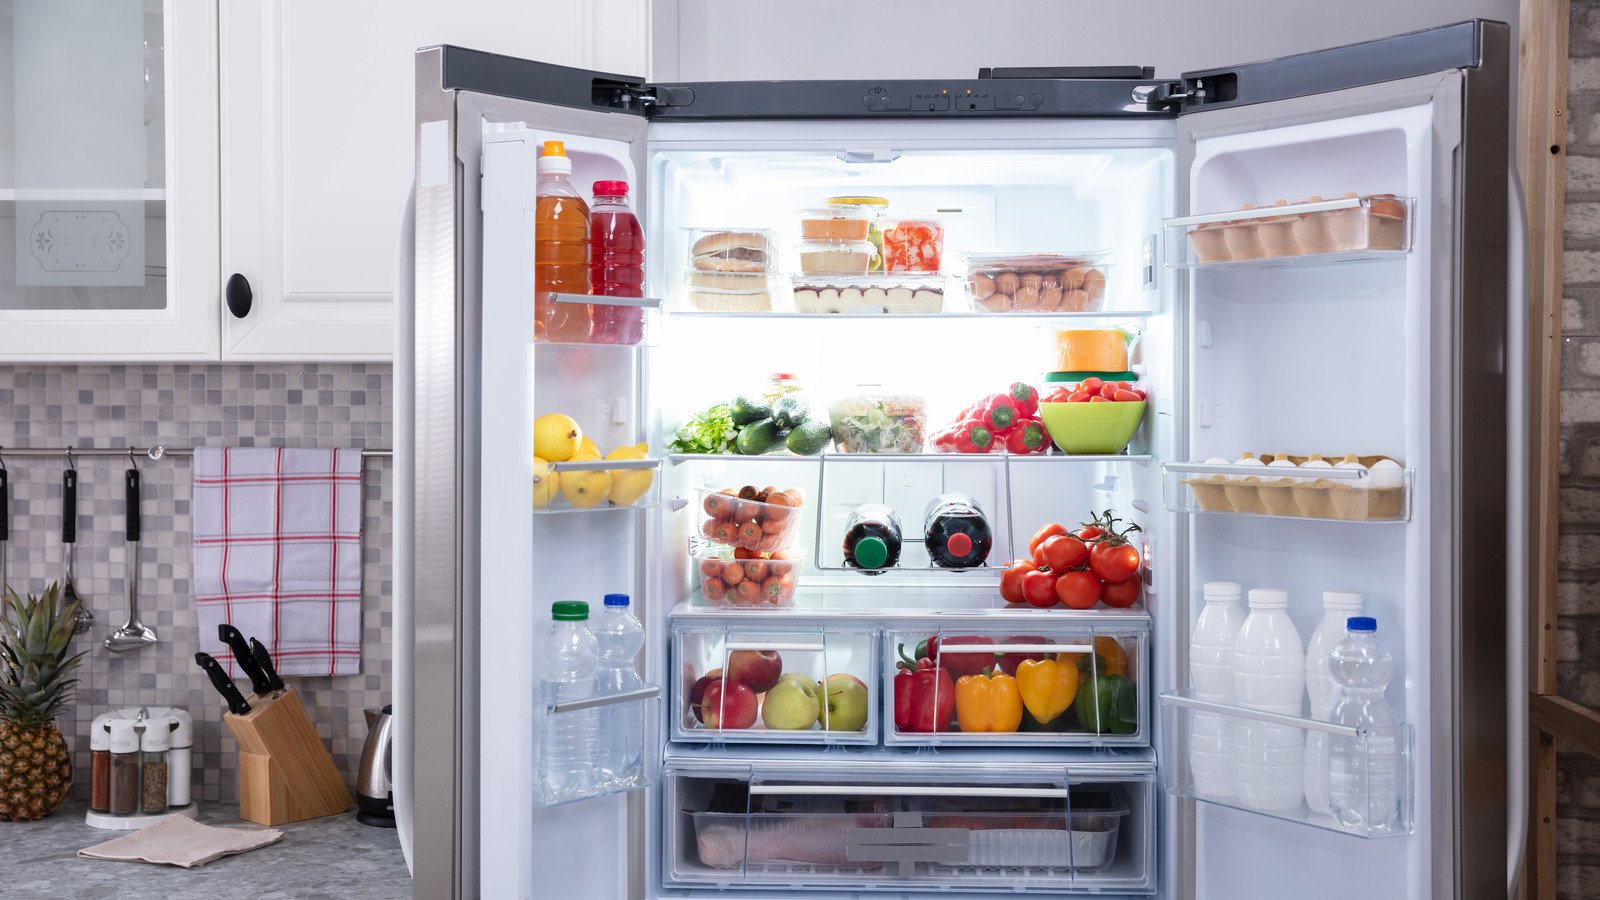 Never Let Your Refrigerator Go Past This Temperature